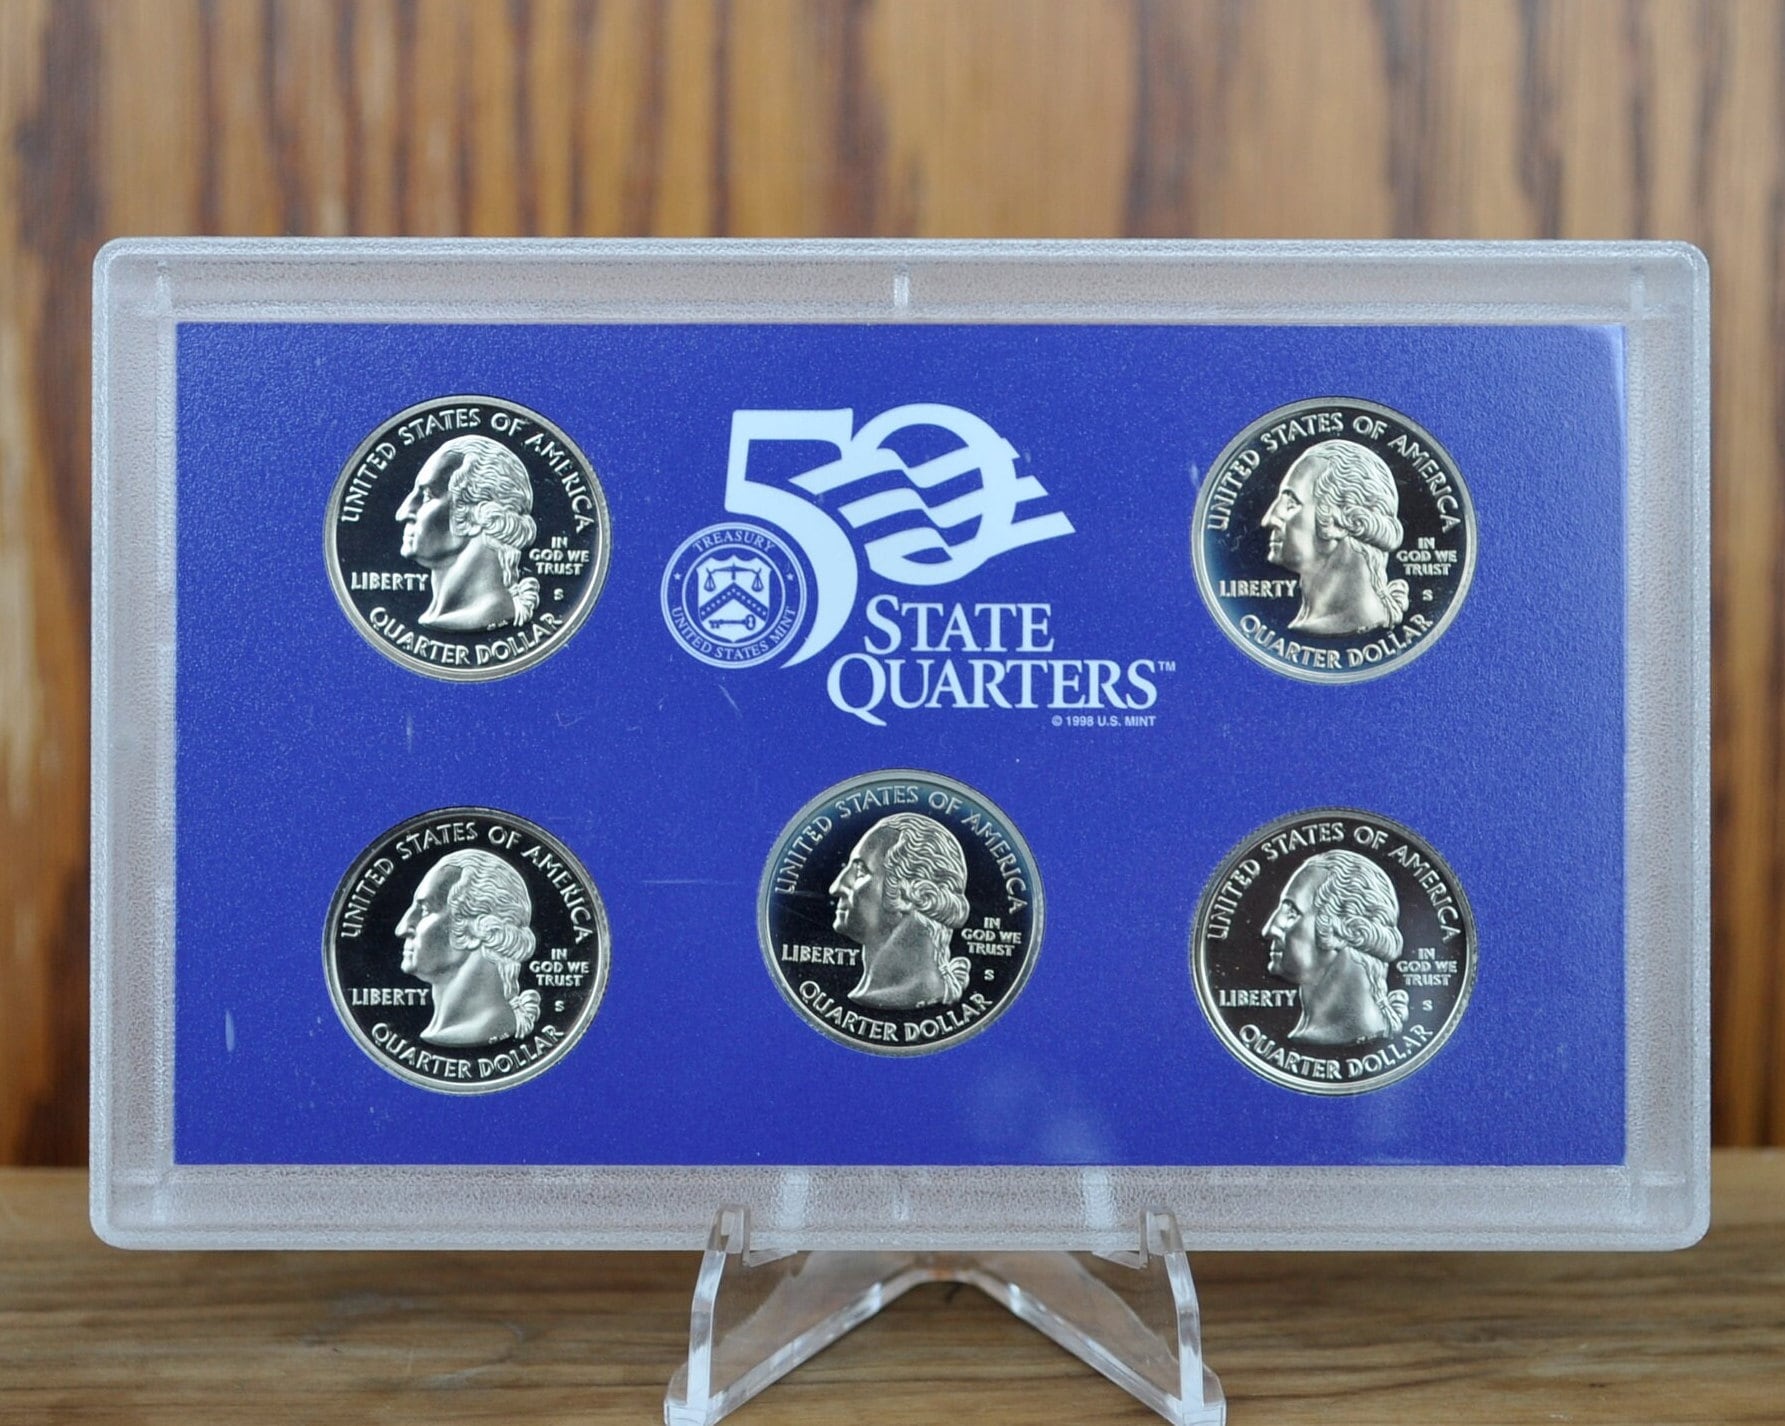 2001-2008 United States Mint Proof Sets - Choose by Date - 2000s US Proof Sets - US Mint Sets 1970s, 1980's 1990's - San Francisco Mint